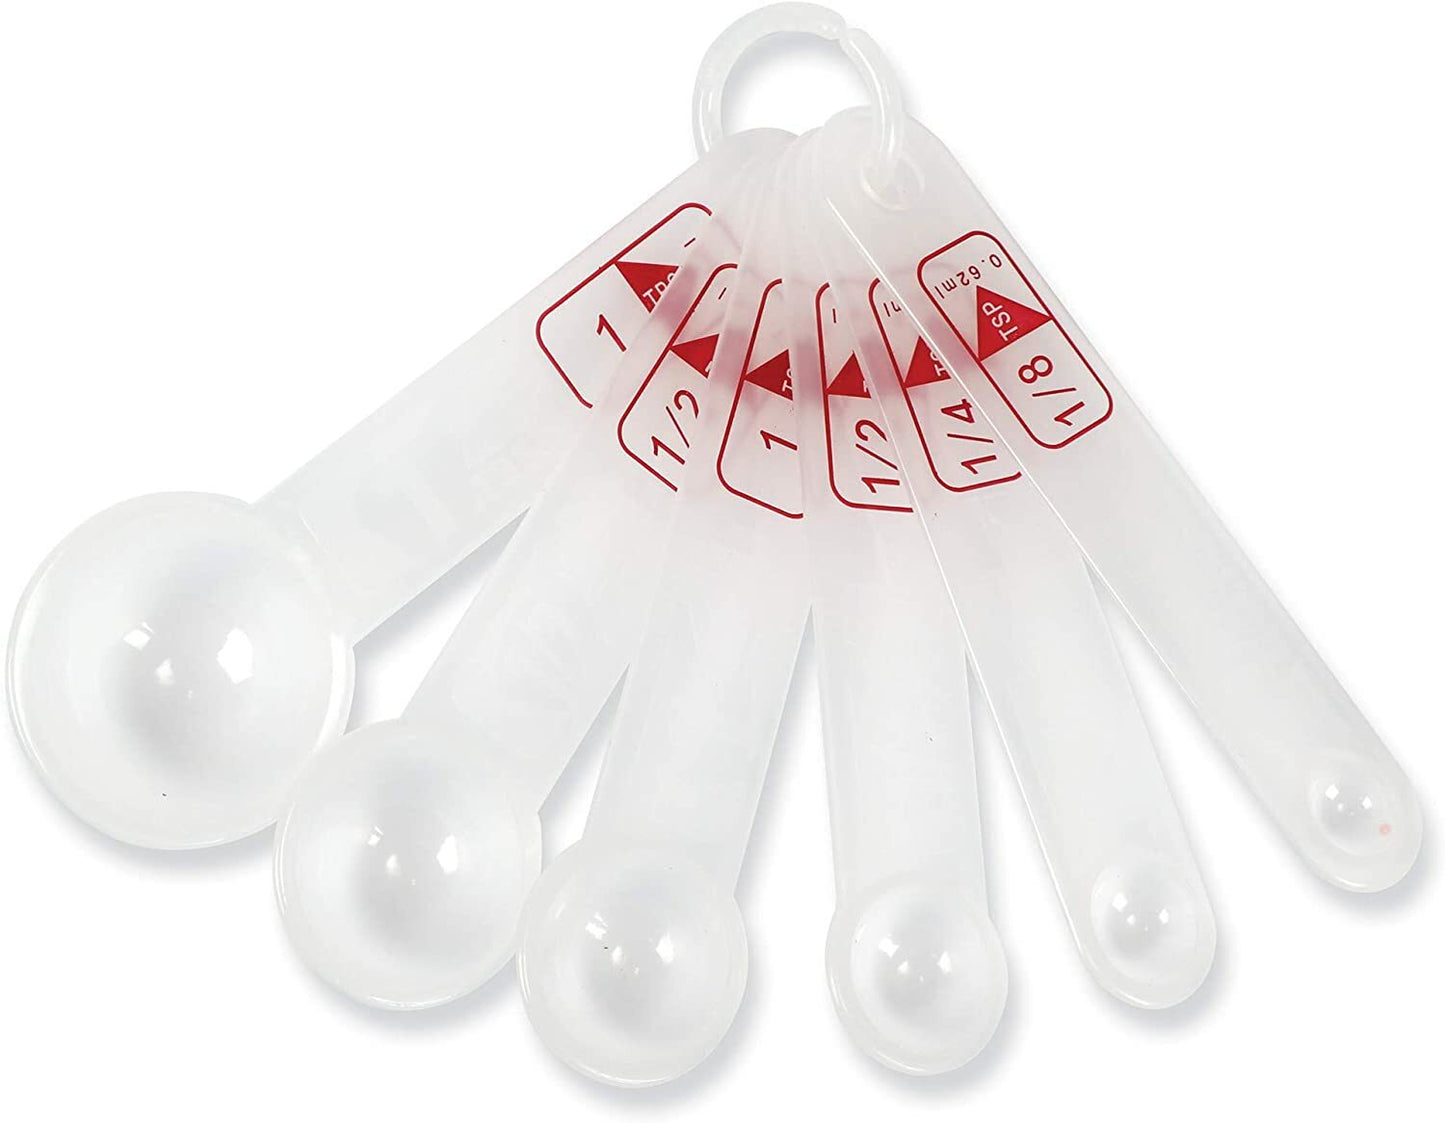 Measuring Spoons, Set of 6 5-13 ages